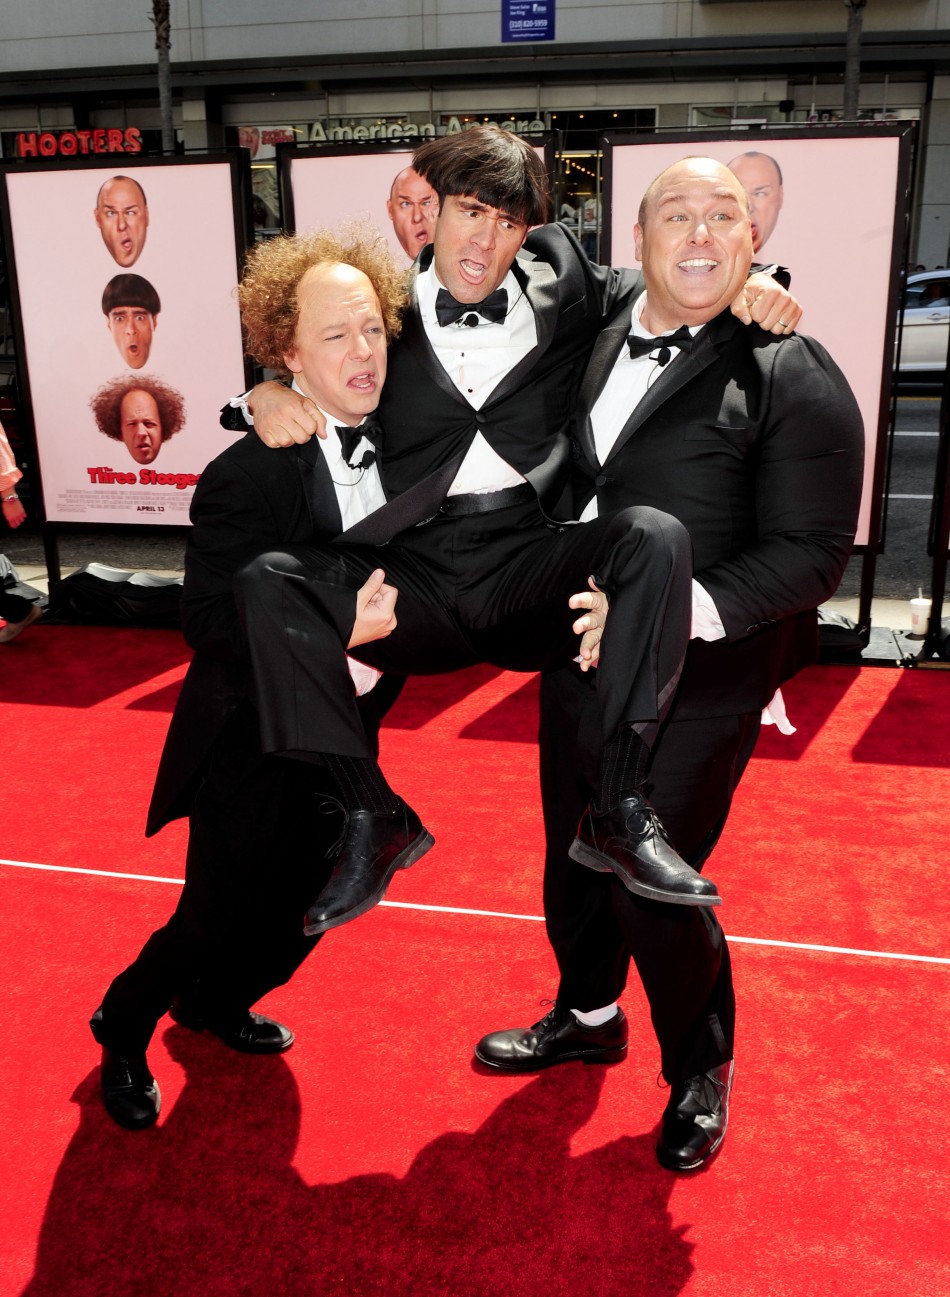 Actors Sean Hayes who plays Larry, Chris Diamantopoulos who plays Moe, and Will Sasso who plays Curly, arrive in character as the Three Stooges at the Hollywood premiere of quotThe Three Stooges The Moviequot in Los Angeles